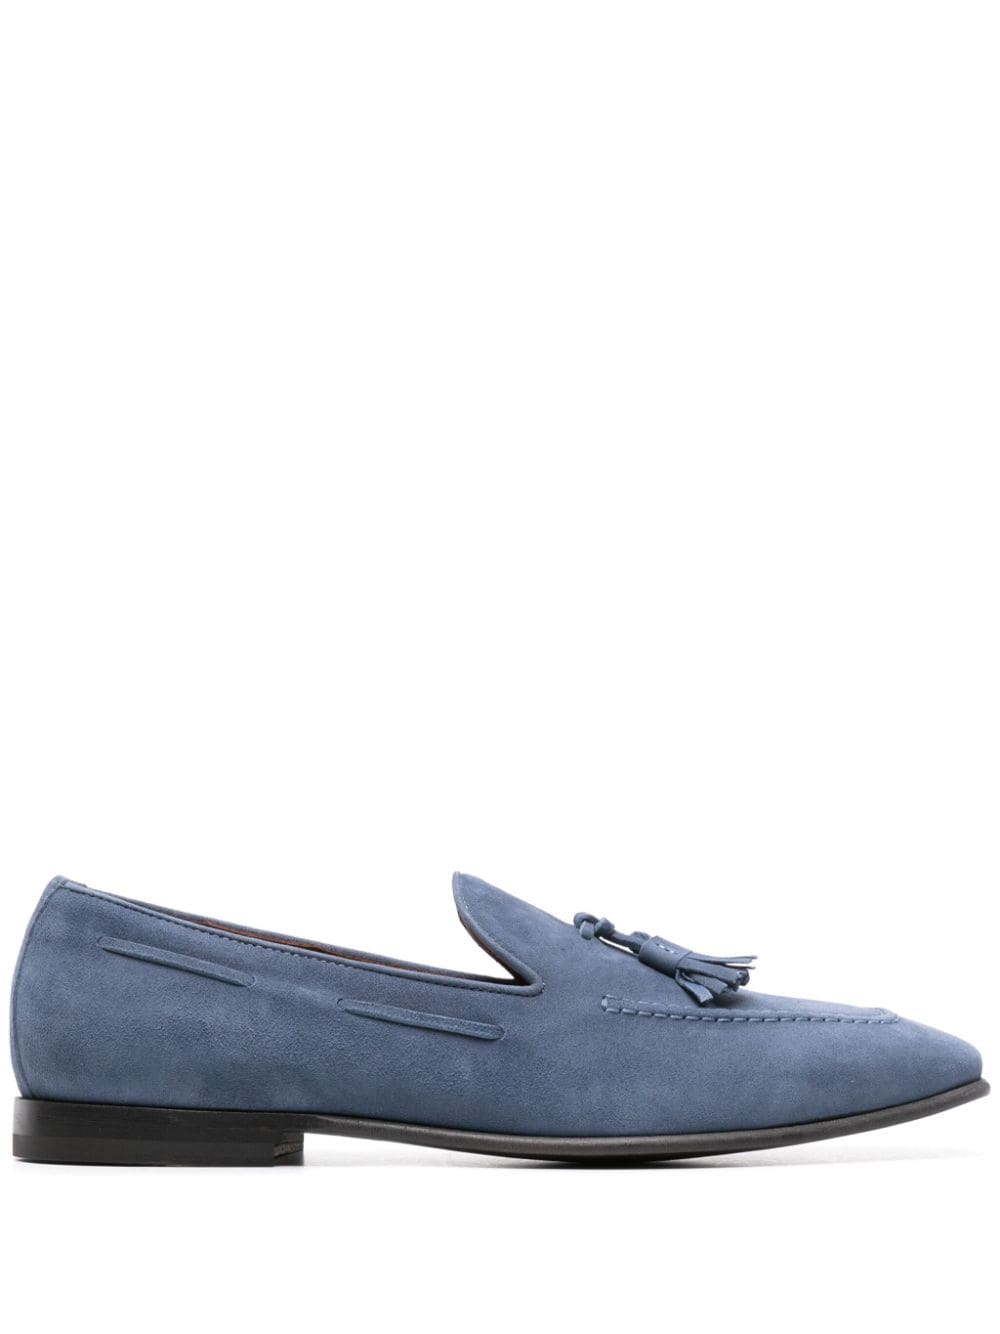 Rodolfo suede loafers